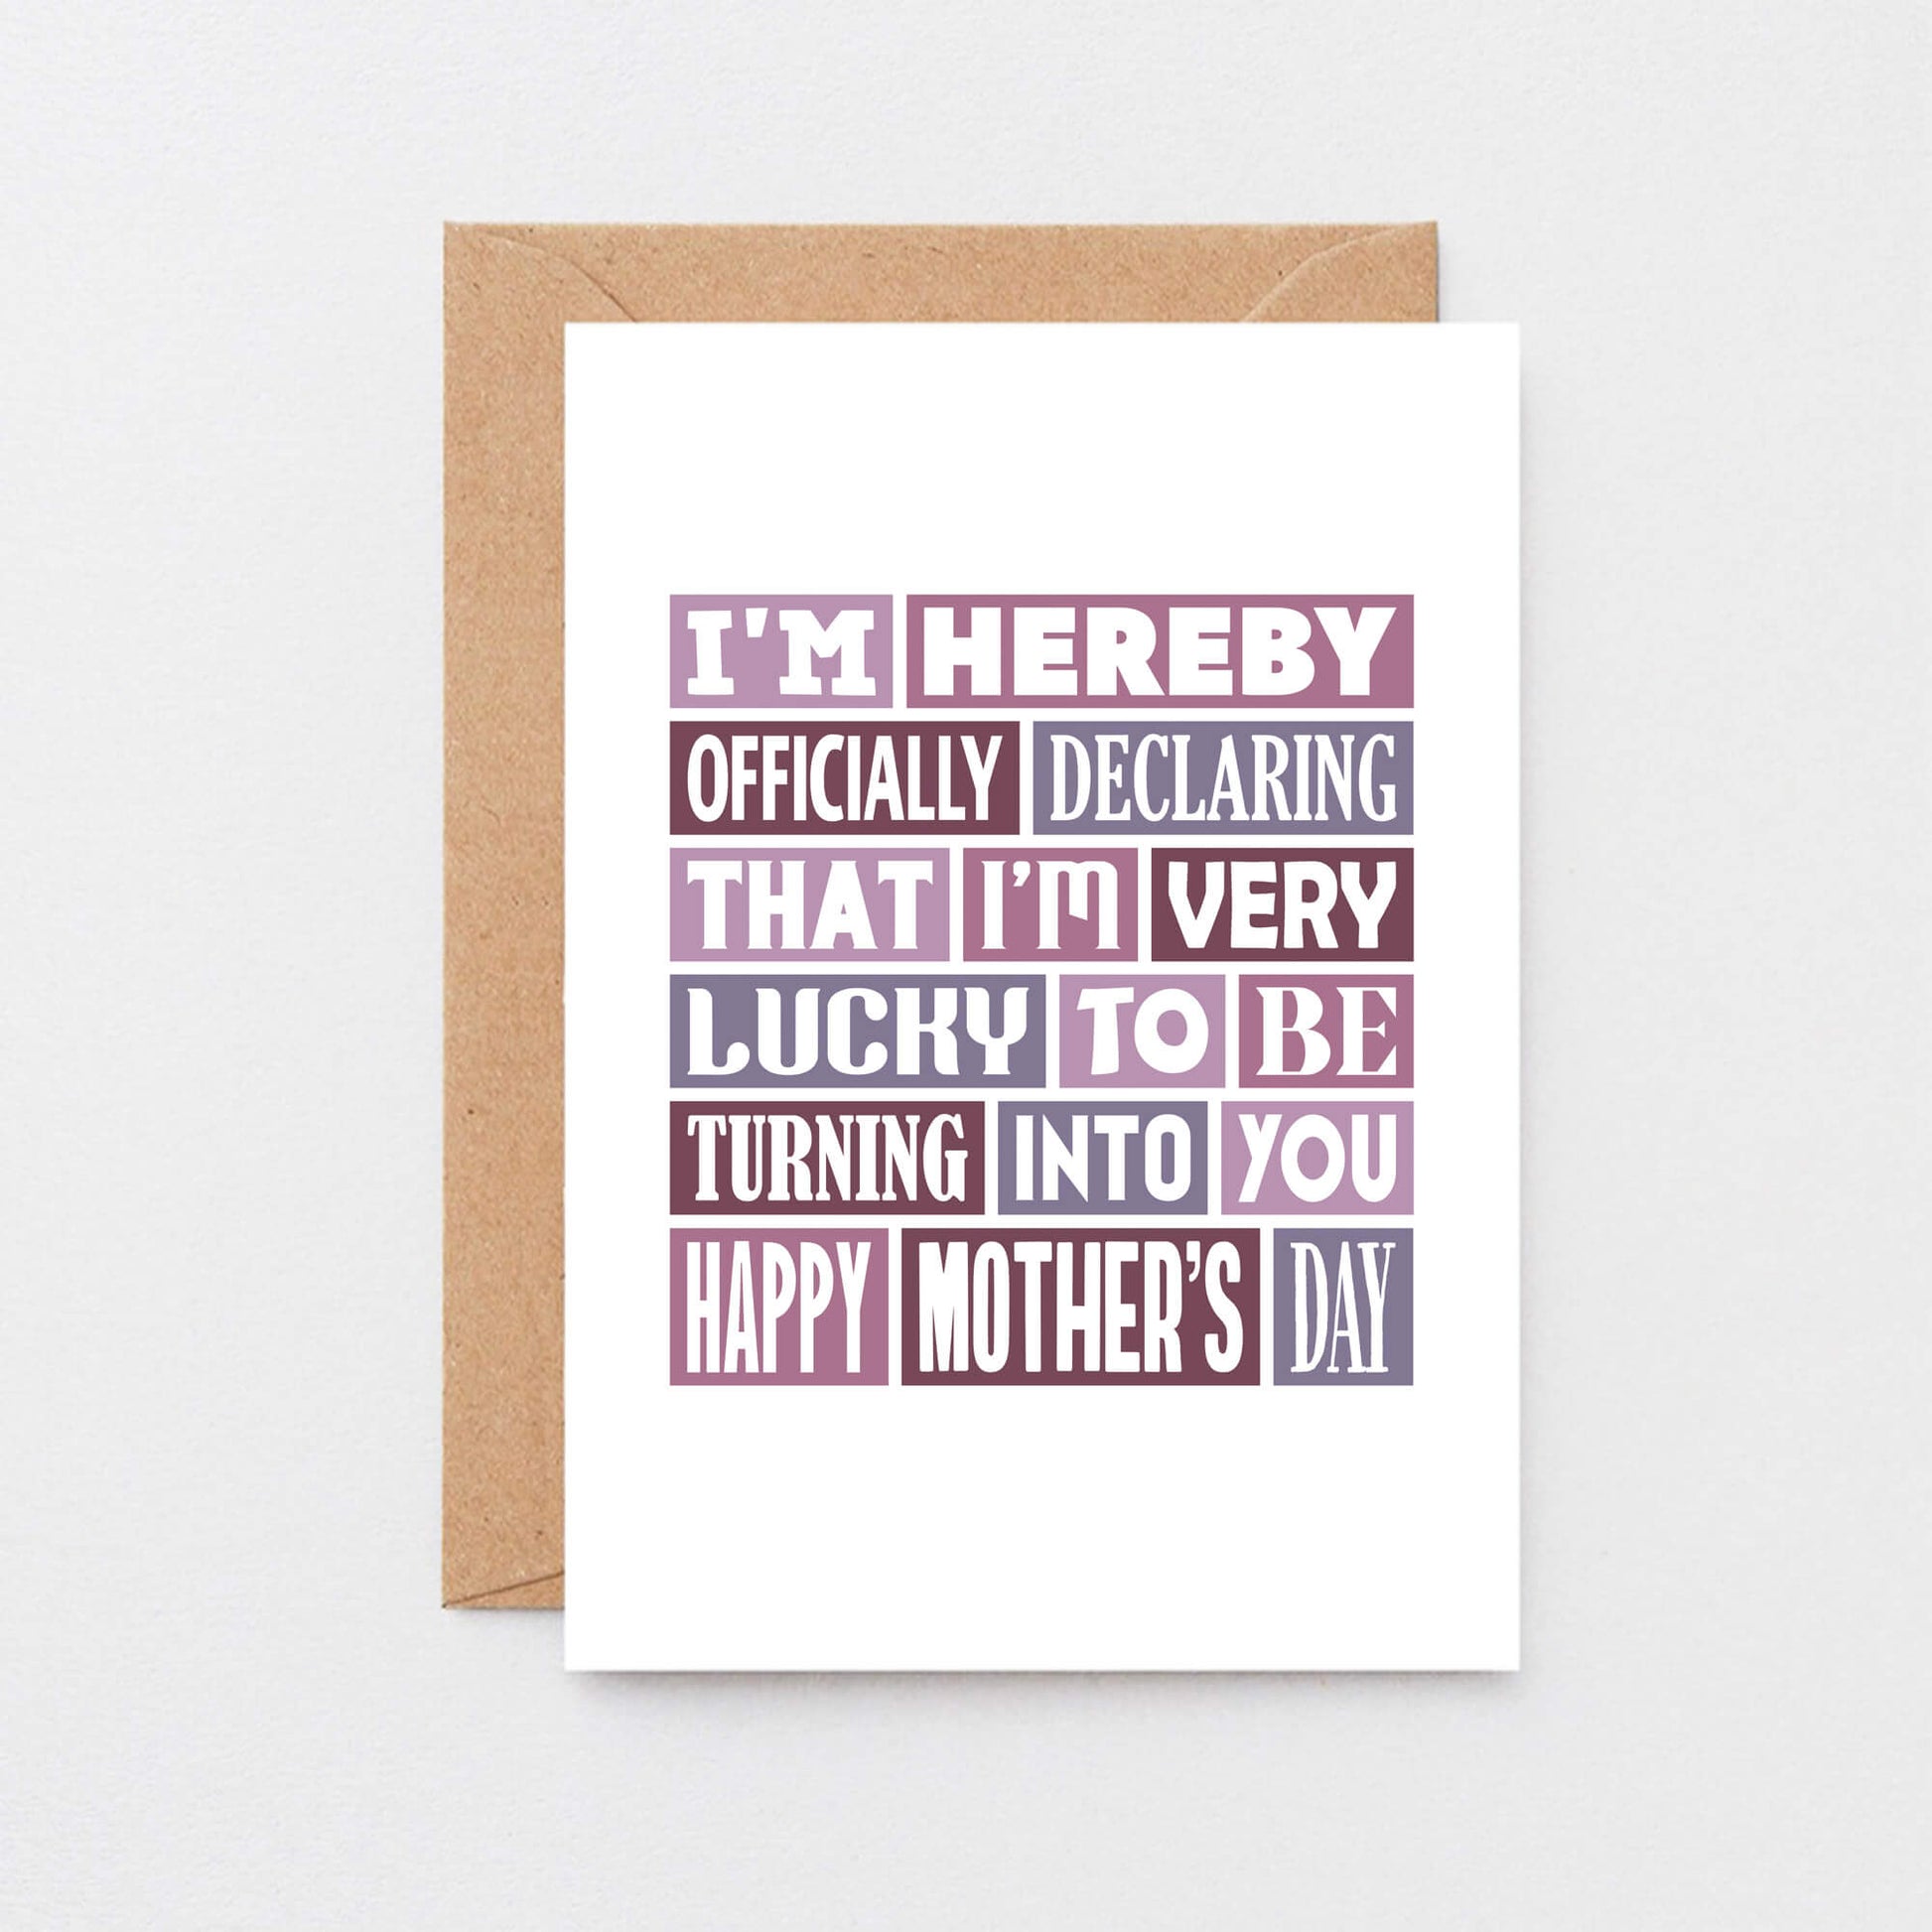 Mother's Day Card by SixElevenCreations. Reads I'm hereby officially declaring that I'm very lucky to be turning into you. Happy Mother's Day. Product Code SEM0008A6